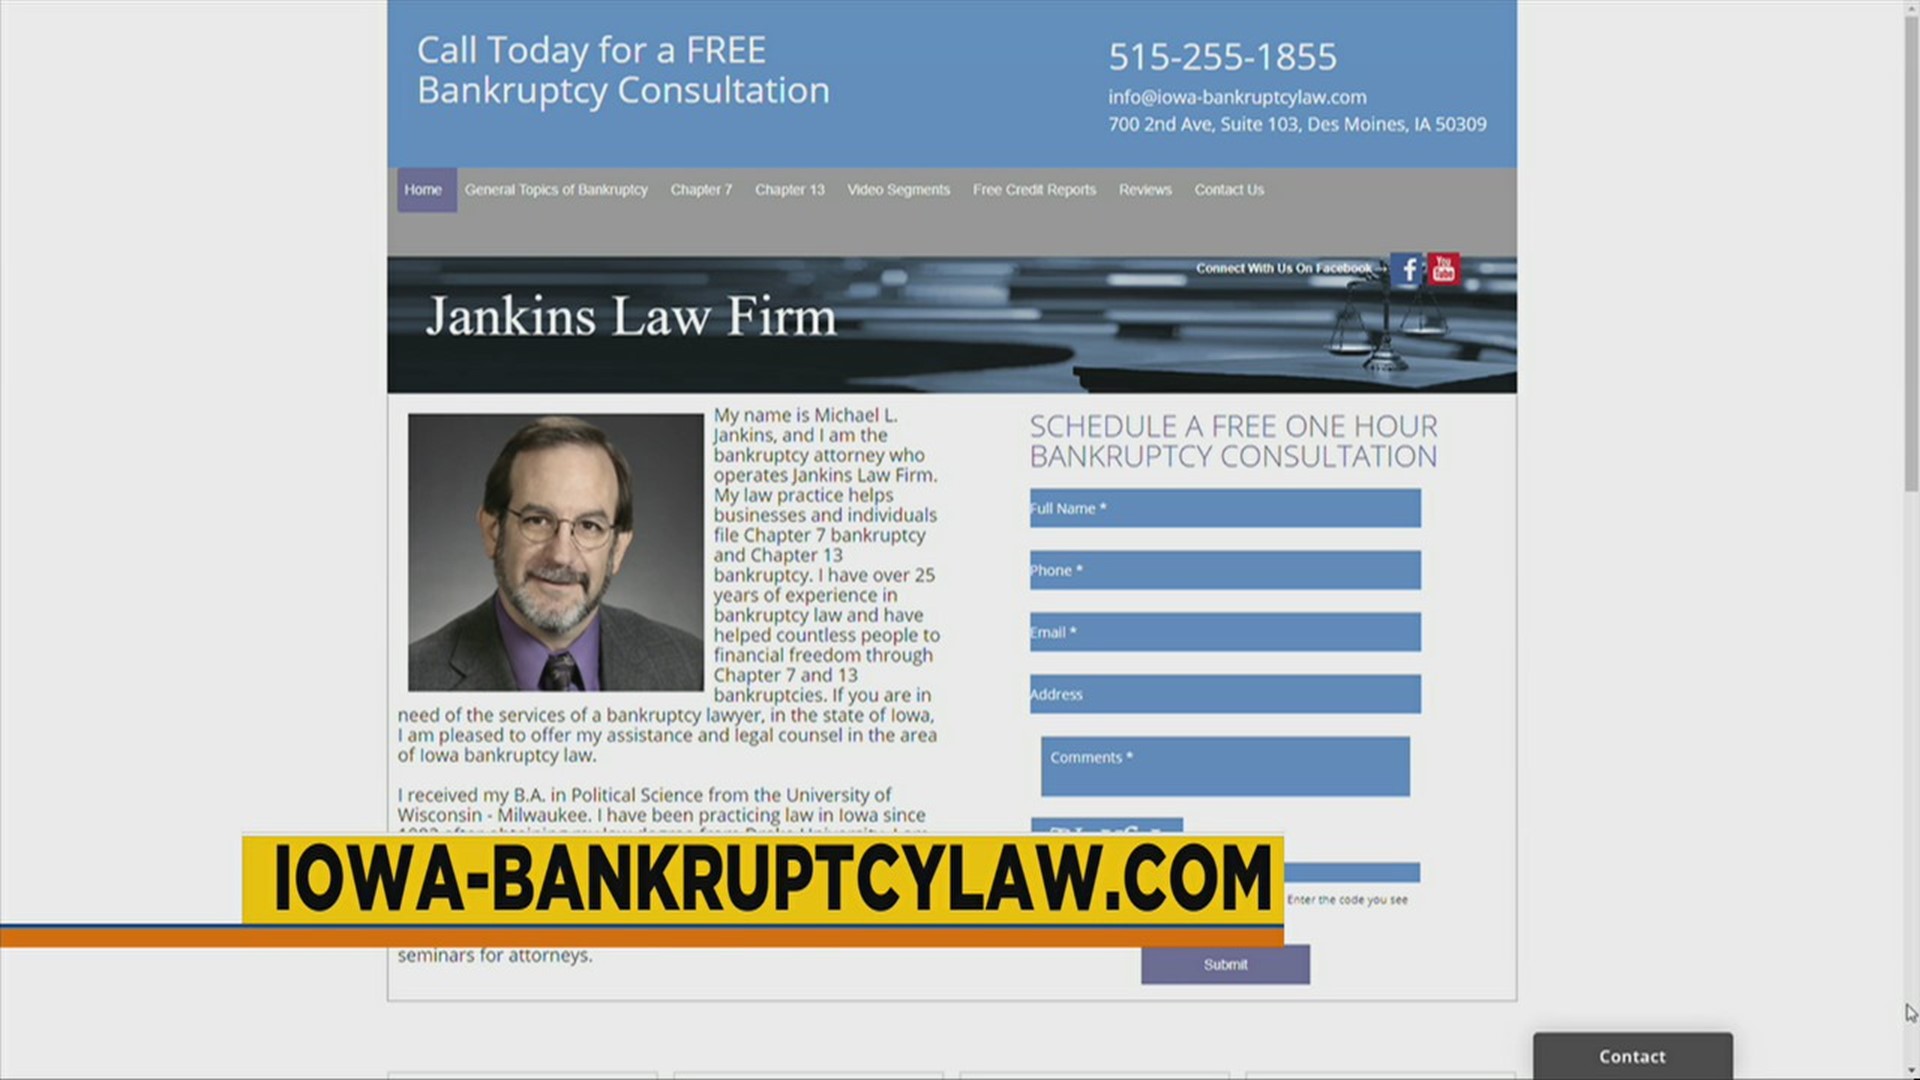 Jankins Law Firm - Dealing with Bankruptcy